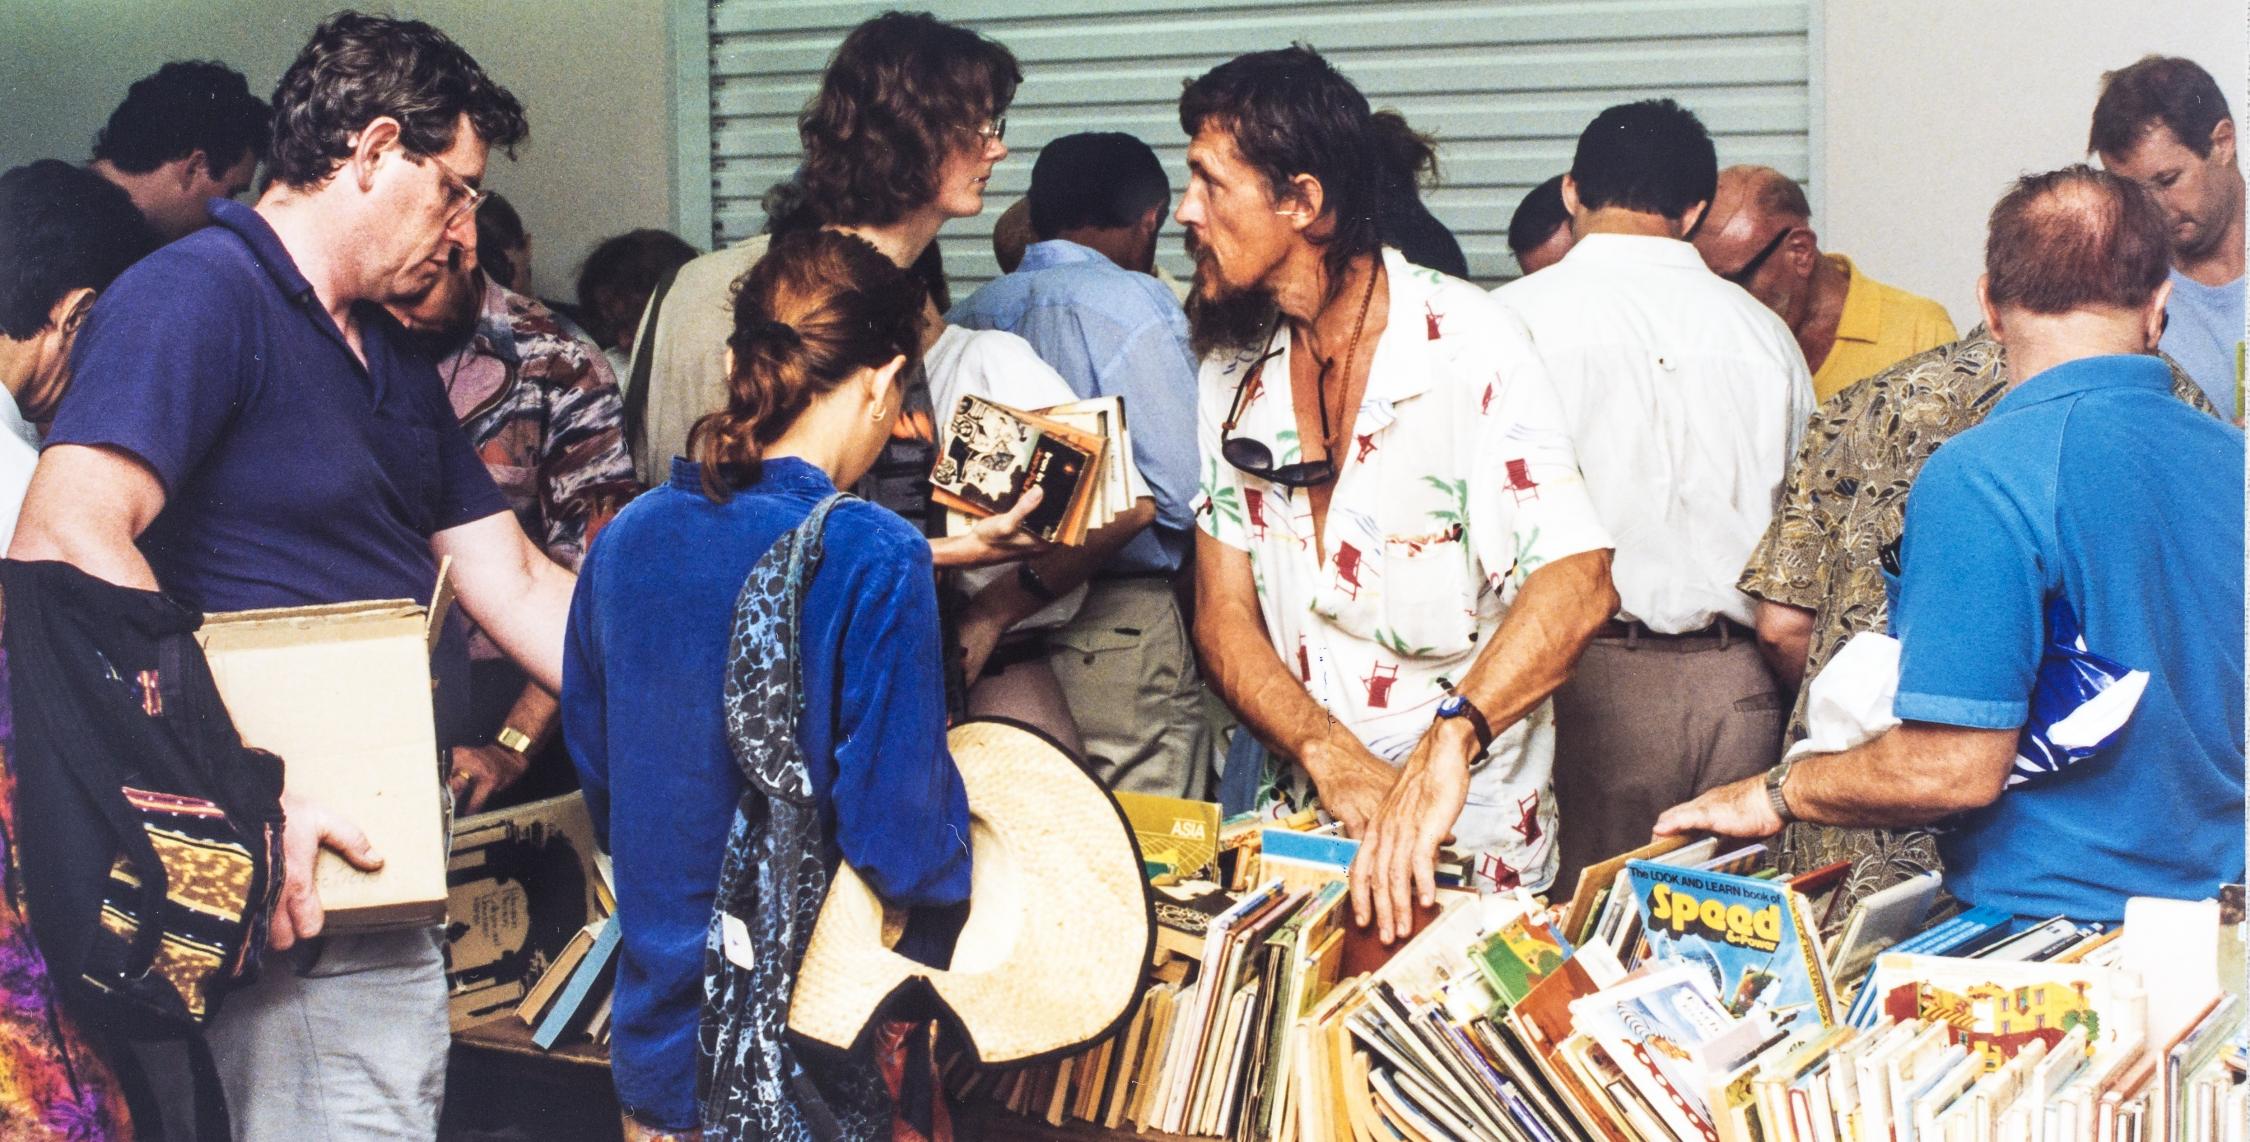 Gathering of people around a table of books that are for sale